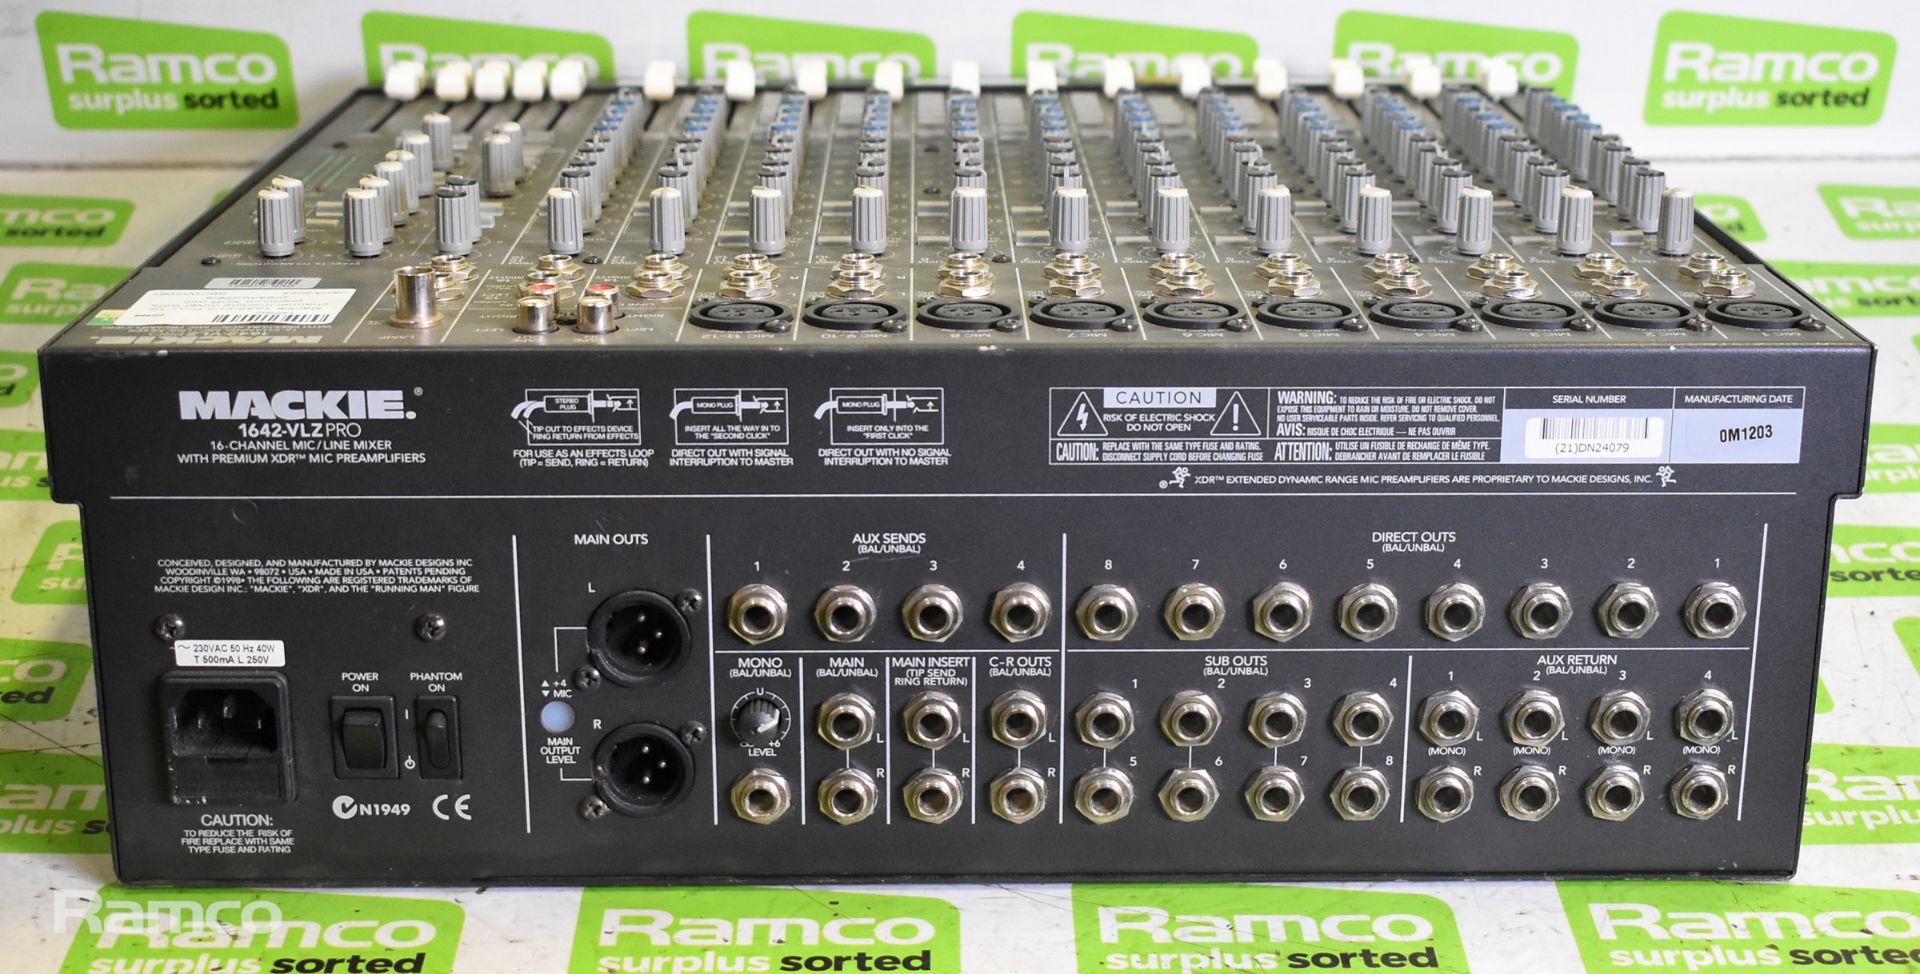 Mackie 1642-VLZ Pro 16 channel mic/line mixer with premium XDR mic preamplifiers - Image 7 of 7